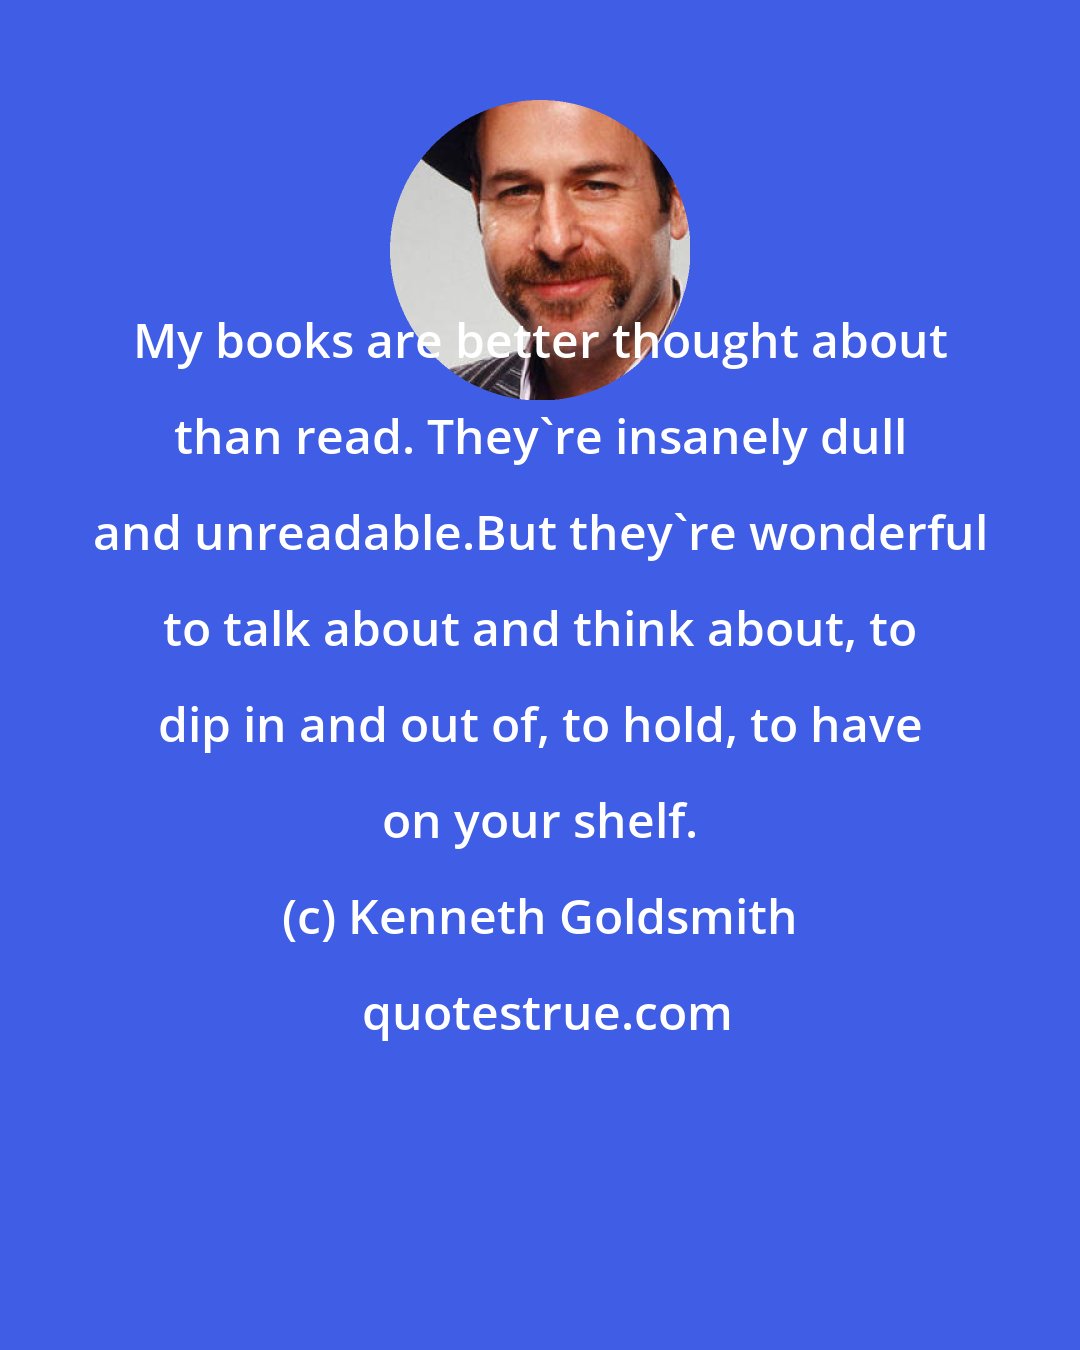 Kenneth Goldsmith: My books are better thought about than read. They're insanely dull and unreadable.But they're wonderful to talk about and think about, to dip in and out of, to hold, to have on your shelf.